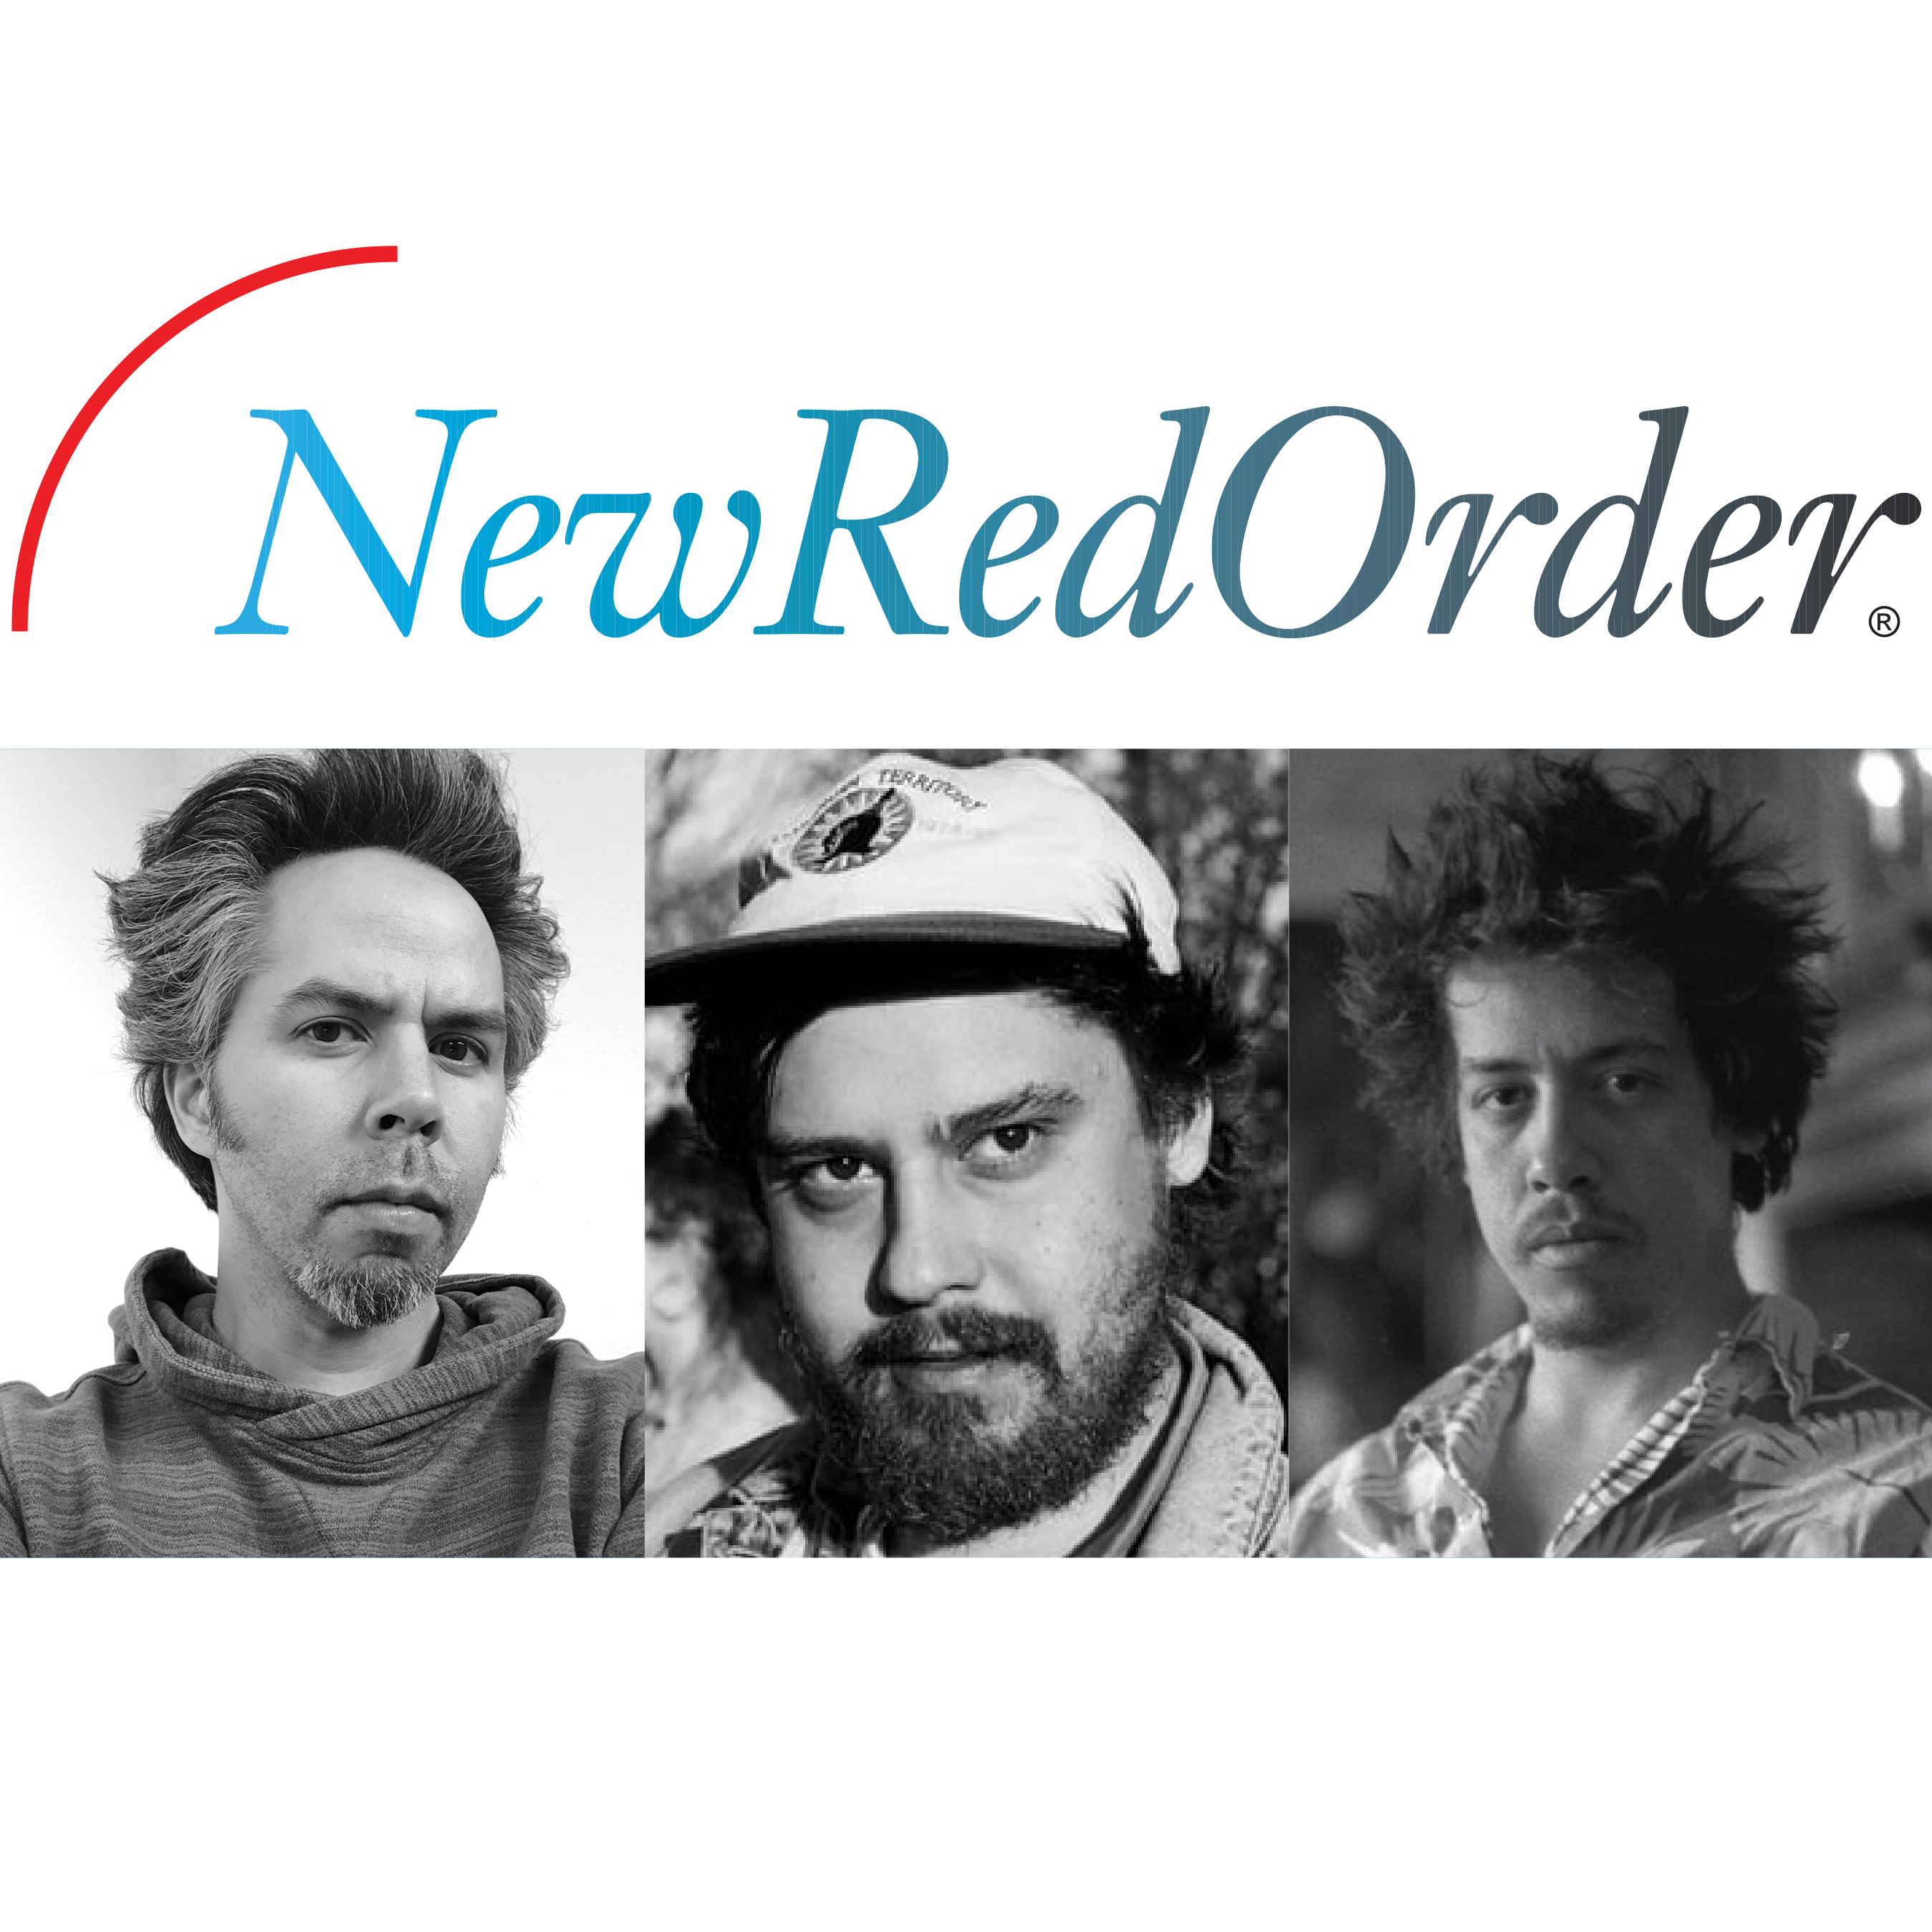 New Red Order - Native Cultures Foundation